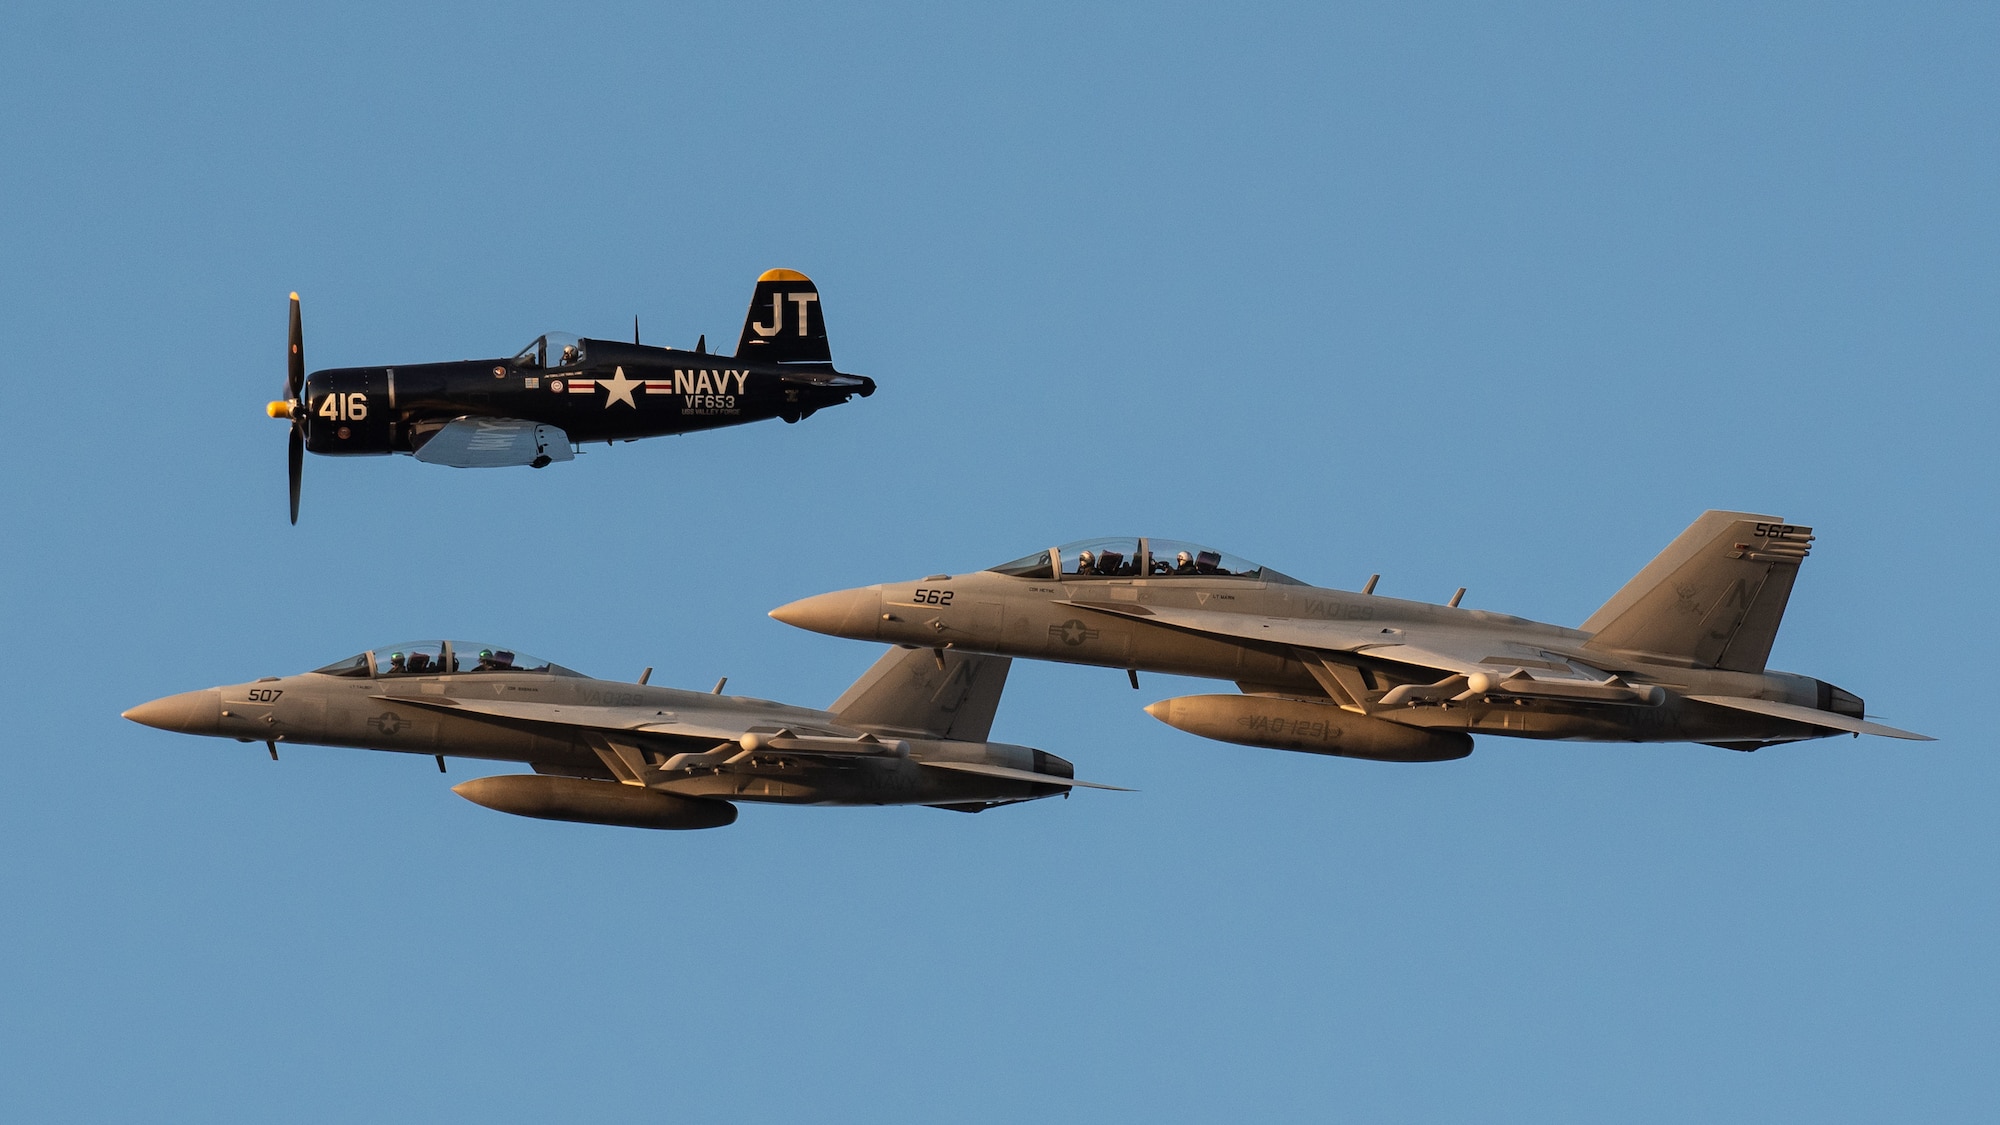 A heritage flight consisting of a World War II-era F-4U Corsair and two modern U.S. Navy E/A-18G Growlers from Whidbey Island Naval Air Station, Wash., performs an aerial demonstration over the Ohio River in downtown Louisville, Ky., April 23, 2022 as part of the Thunder Over Louisville air show. This year’s event celebrated the 75th anniversary of the United States Air Force. (U.S. Air National Guard photo by Dale Greer)